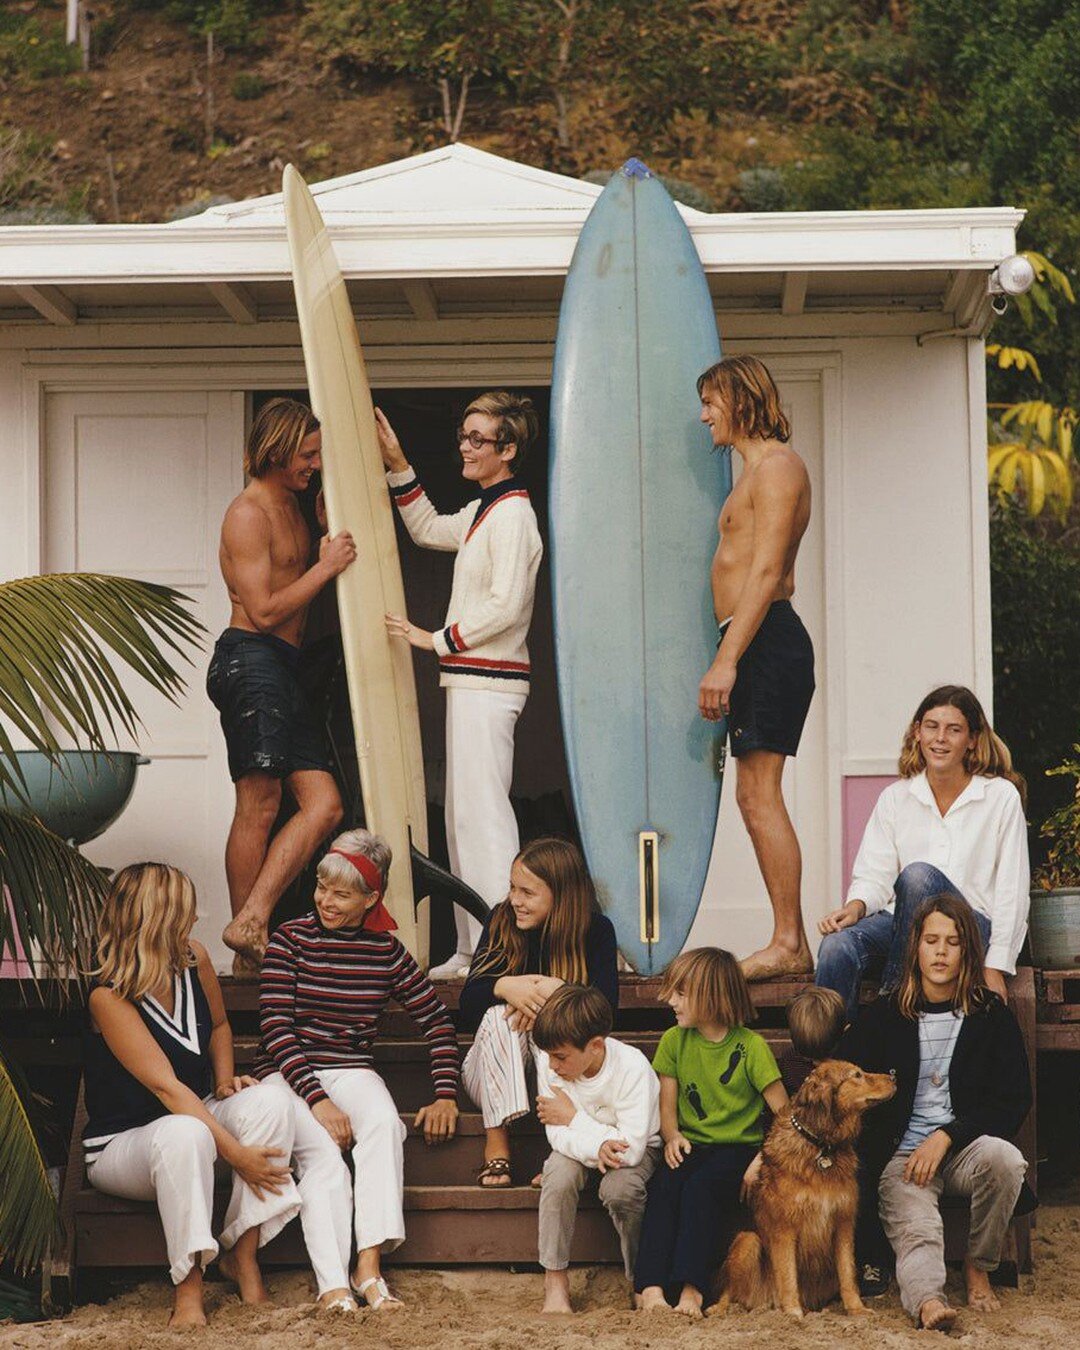 &ldquo;Attractive people doing attractive things in attractive places.&rdquo; That&rsquo;s what we&rsquo;re  about.

(Surfers outside a beach hut in Laguna Beach, California, January 1970)

📸: Slim Aarons